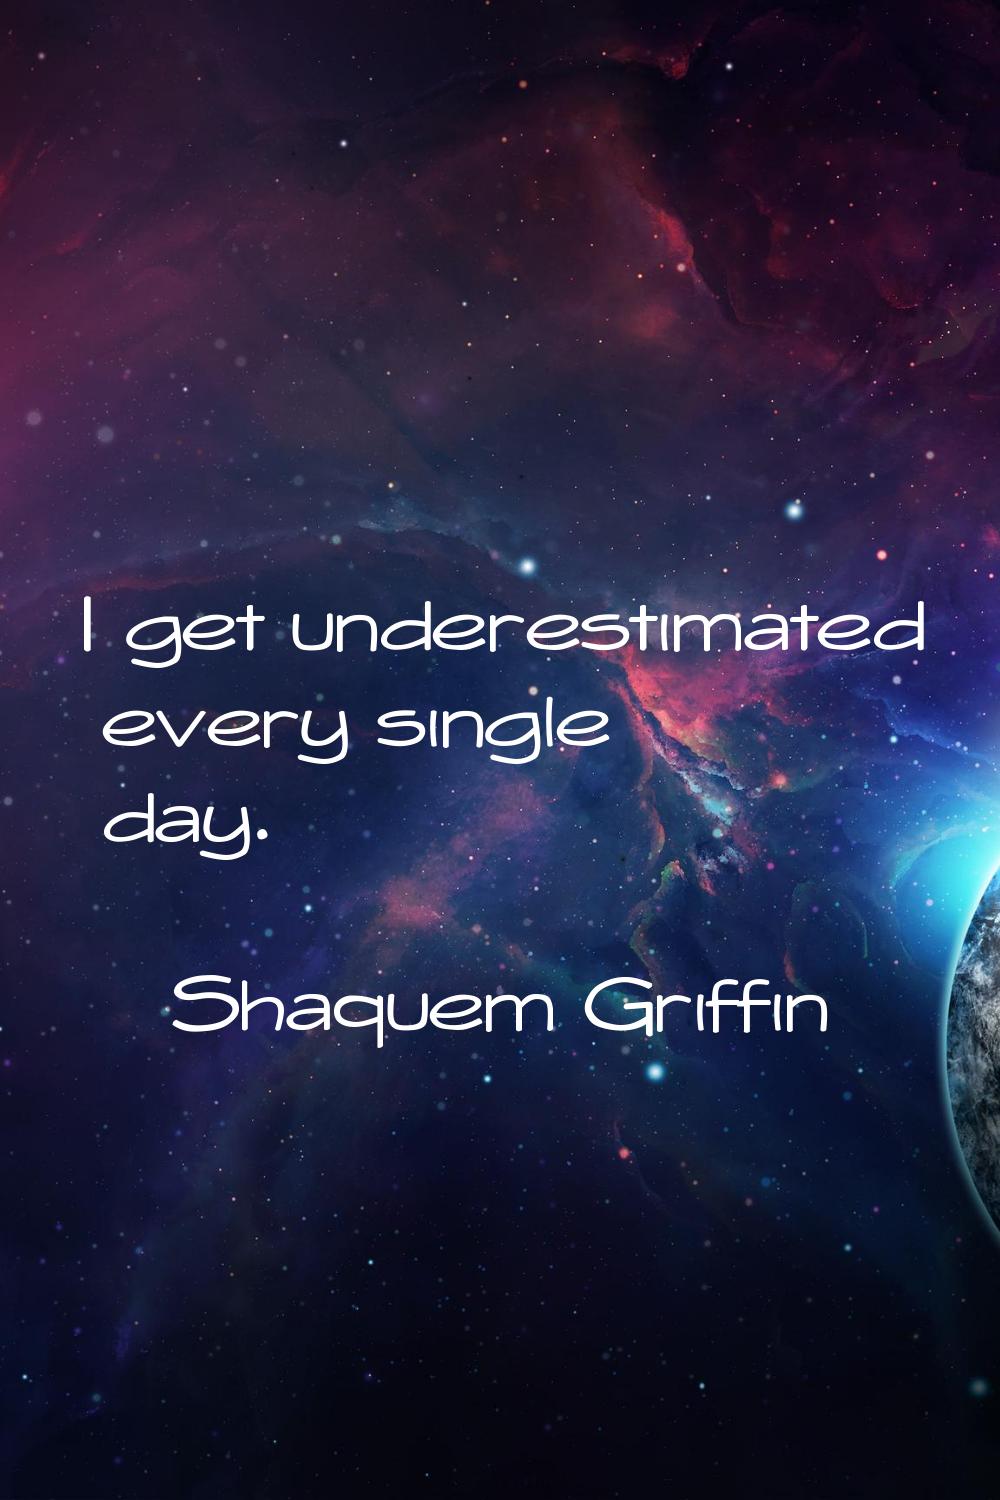 I get underestimated every single day.